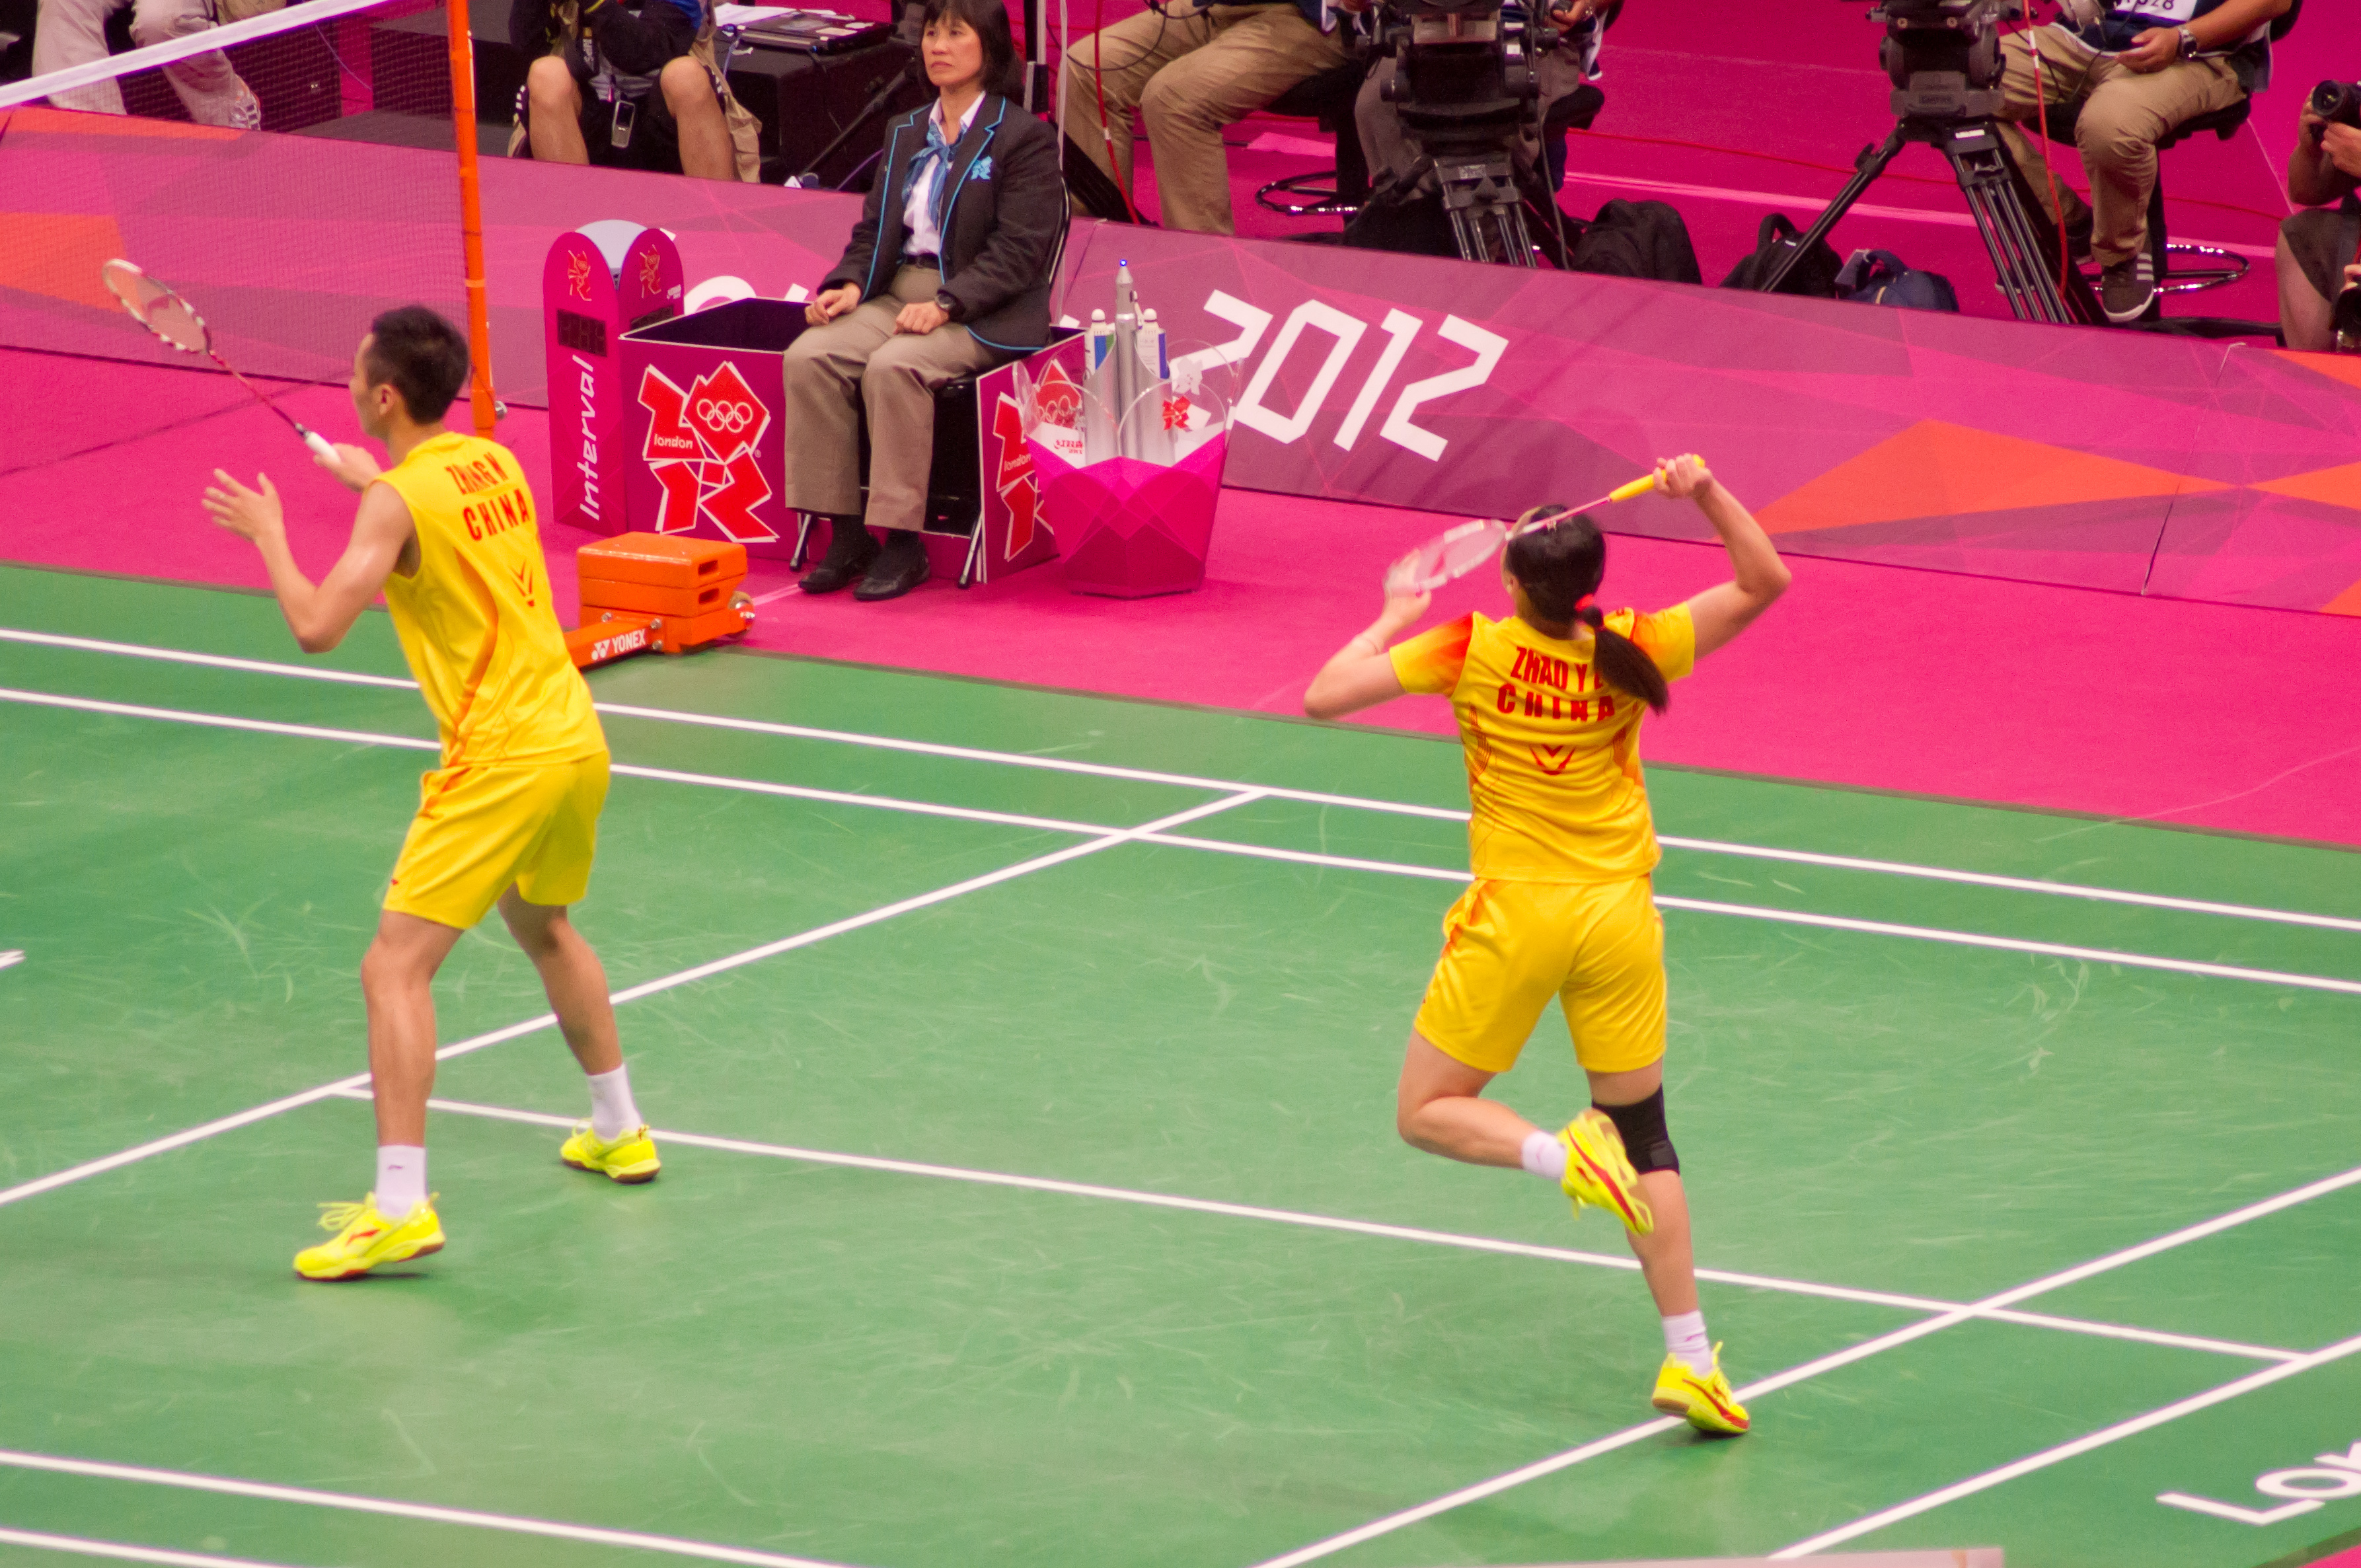 Different Uses Of A Badminton Clear That Improves Your Game